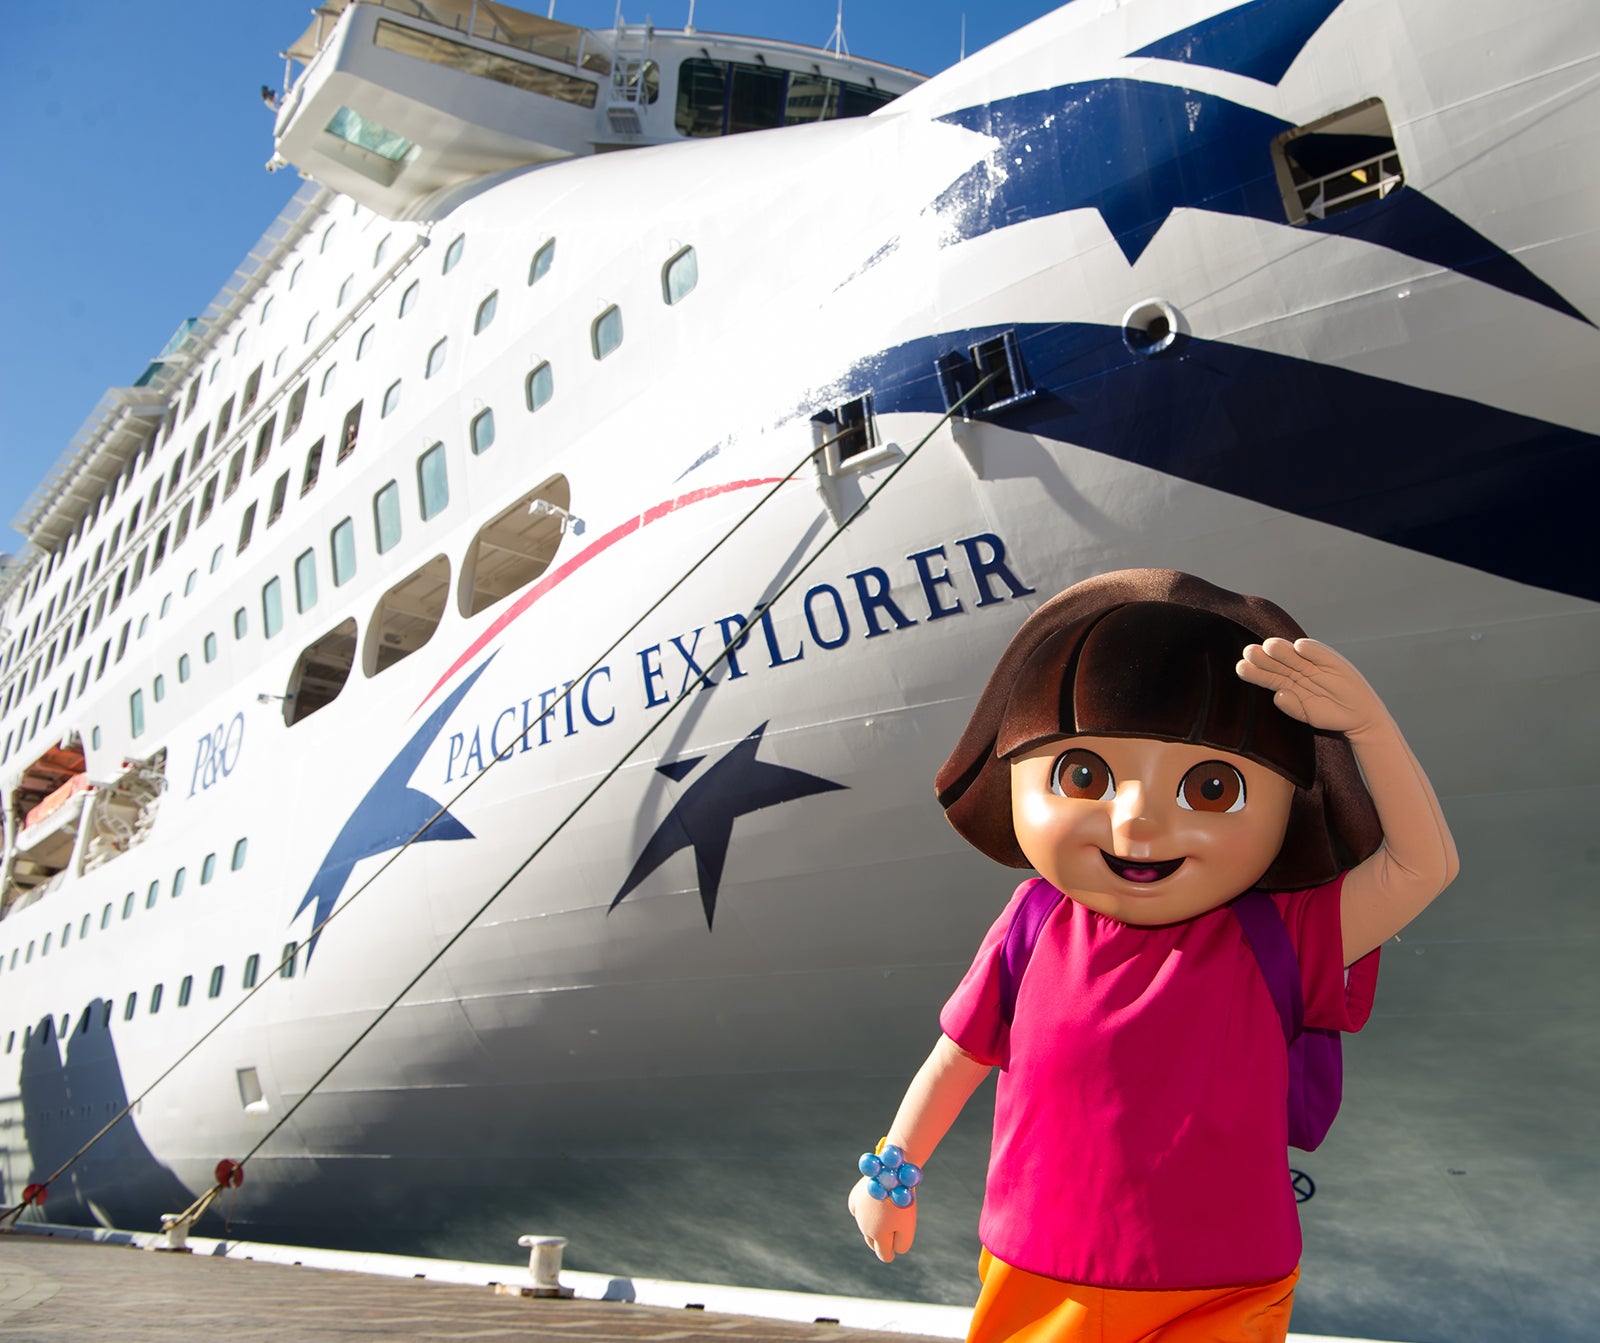 SYDNEY, AUSTRALIA - JULY 02: Dora the Explorer with the Pacific Explorer during the official naming ceremony of P&O's newest ship 'Pacific Explorer' at the Overseas Passenger Terminal on July 2, 2017 in Sydney, Australia. Dora the Explorer was named as the ships godmother and Nickelodeon arranged some special slime for the occasion. (Photo by James D. Morgan/Getty Images)